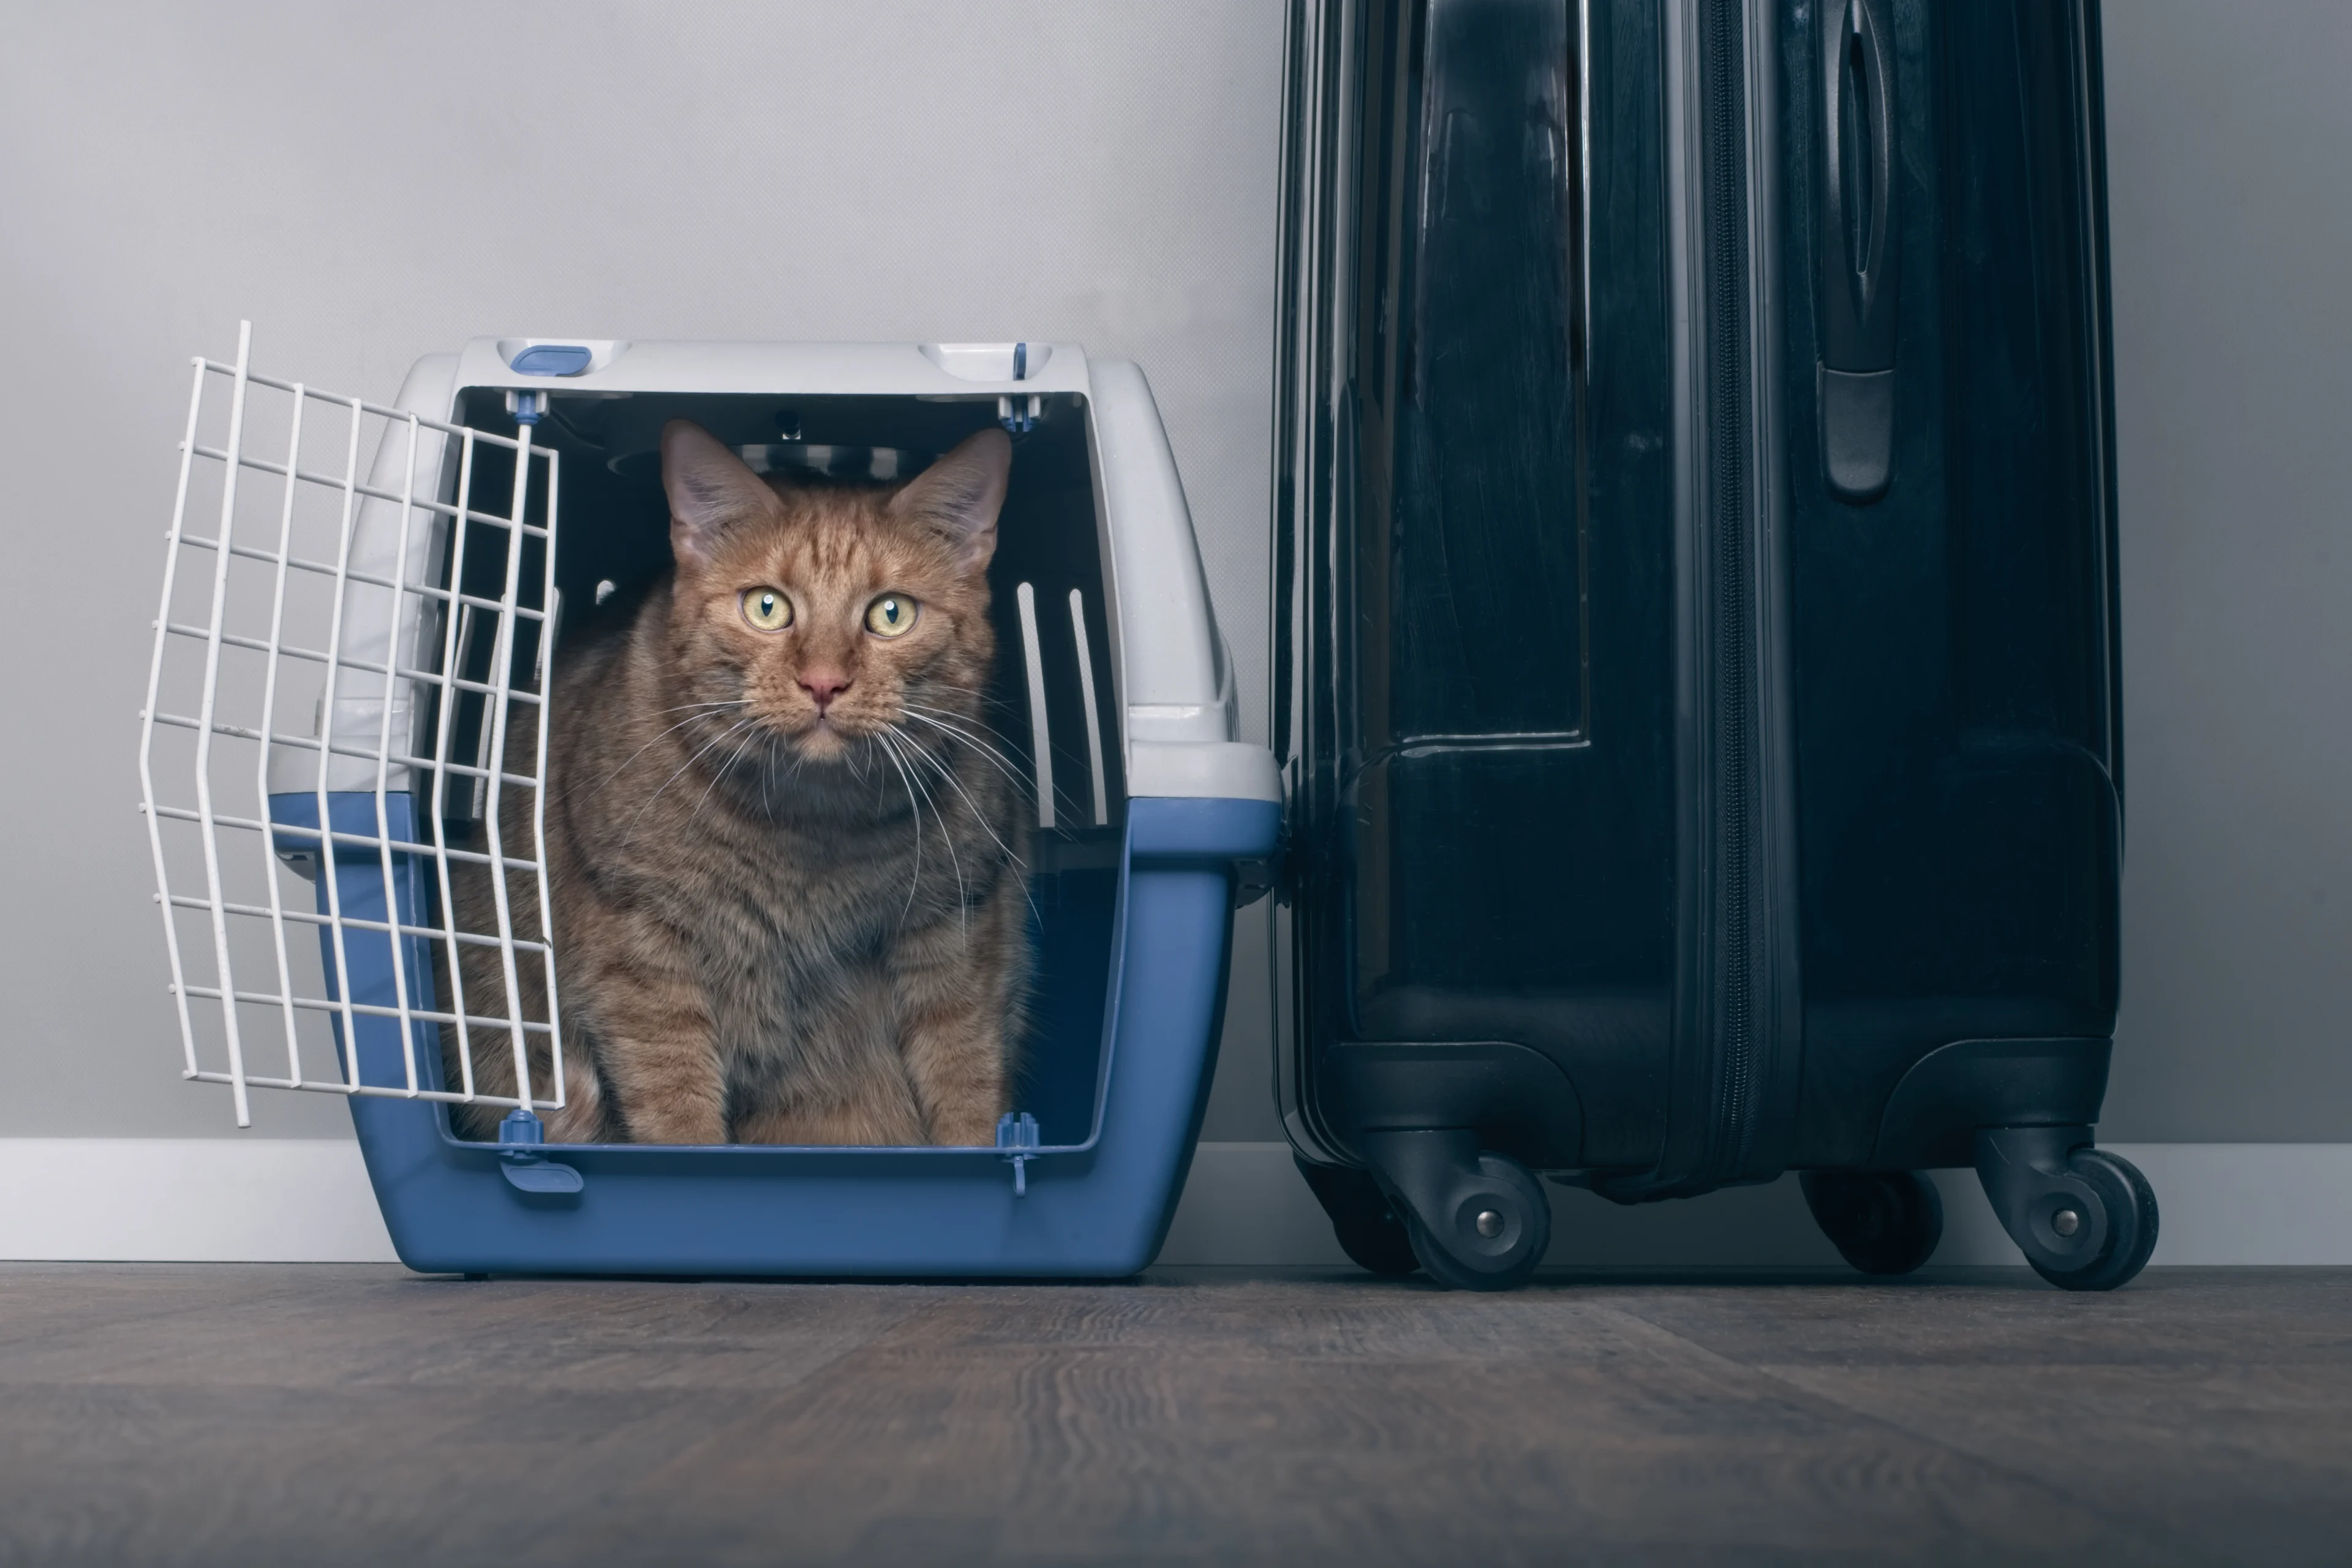 A ginger cat in a pet carrier with the door open, on the ground next to a suitcase